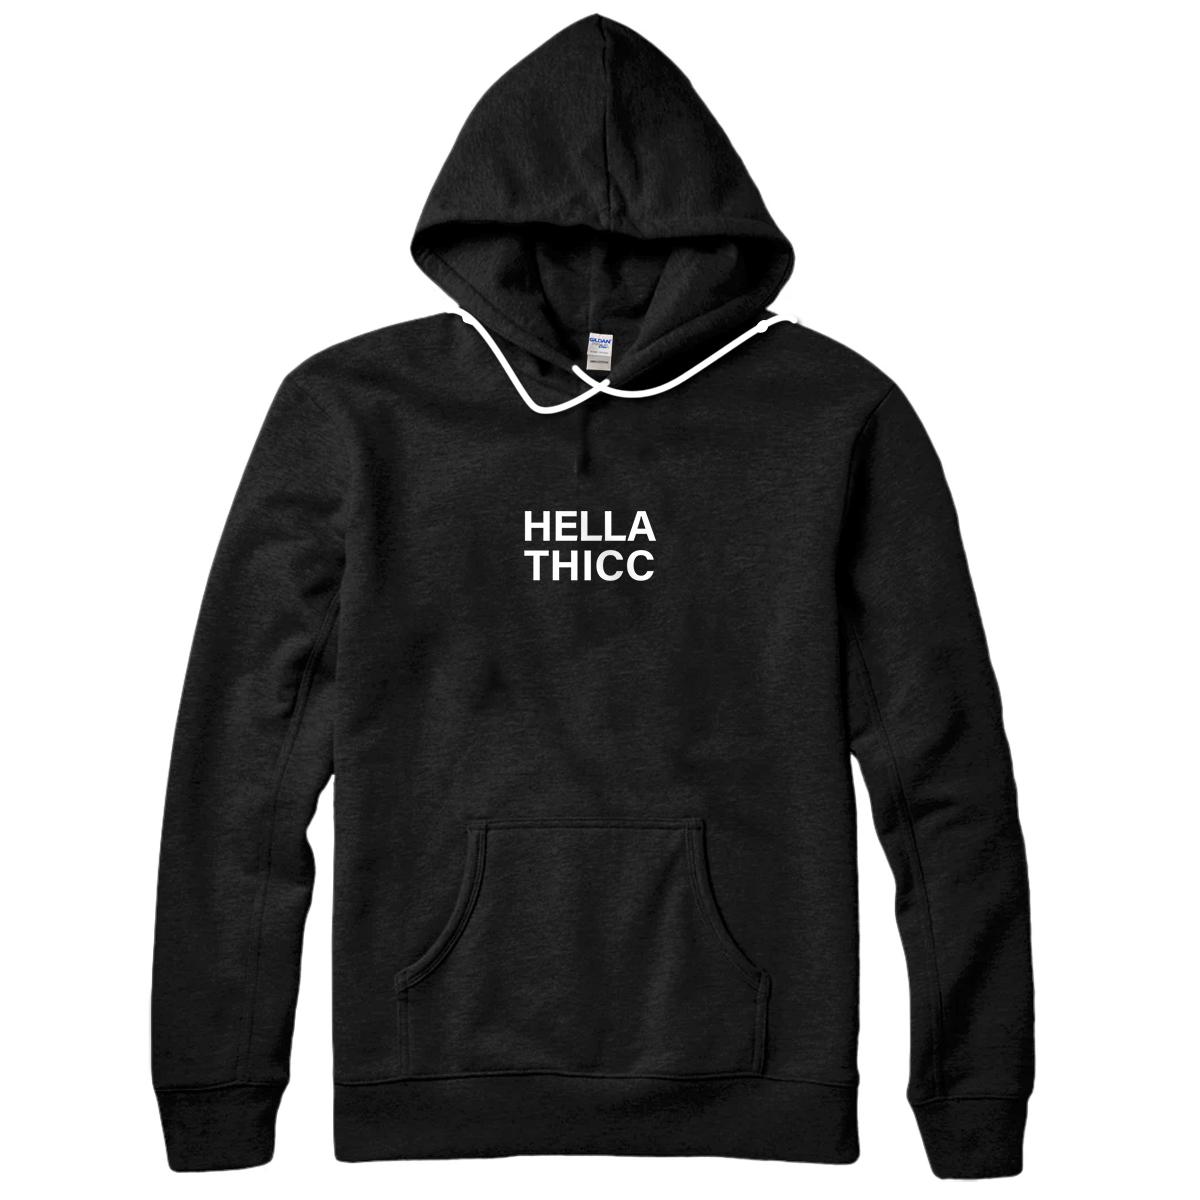 Personalized Hella Thicc Pullover Hoodie